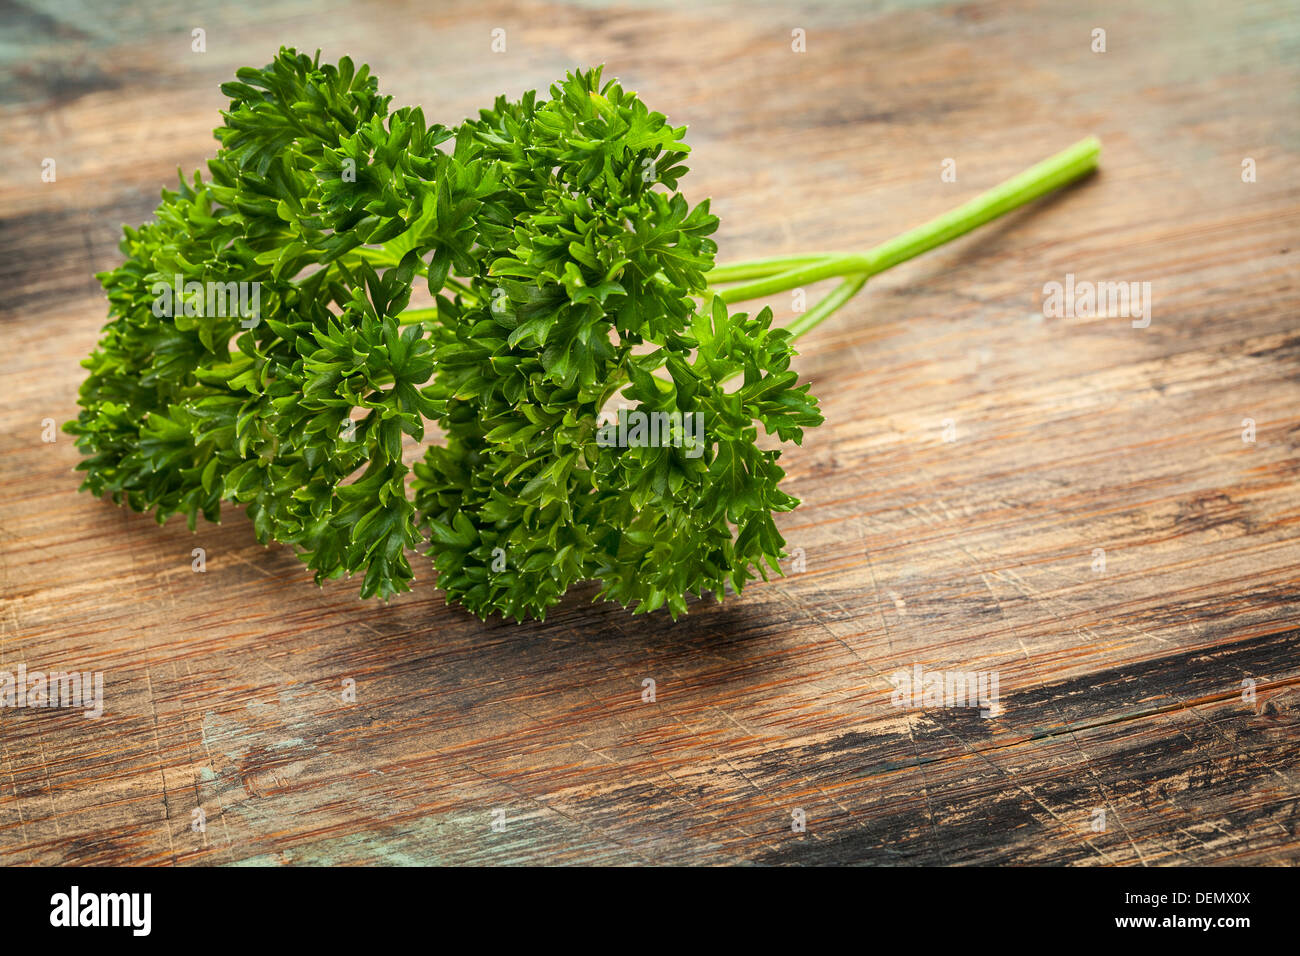 a fresh leaves of curled leaf parsley on wood surface Stock Photo